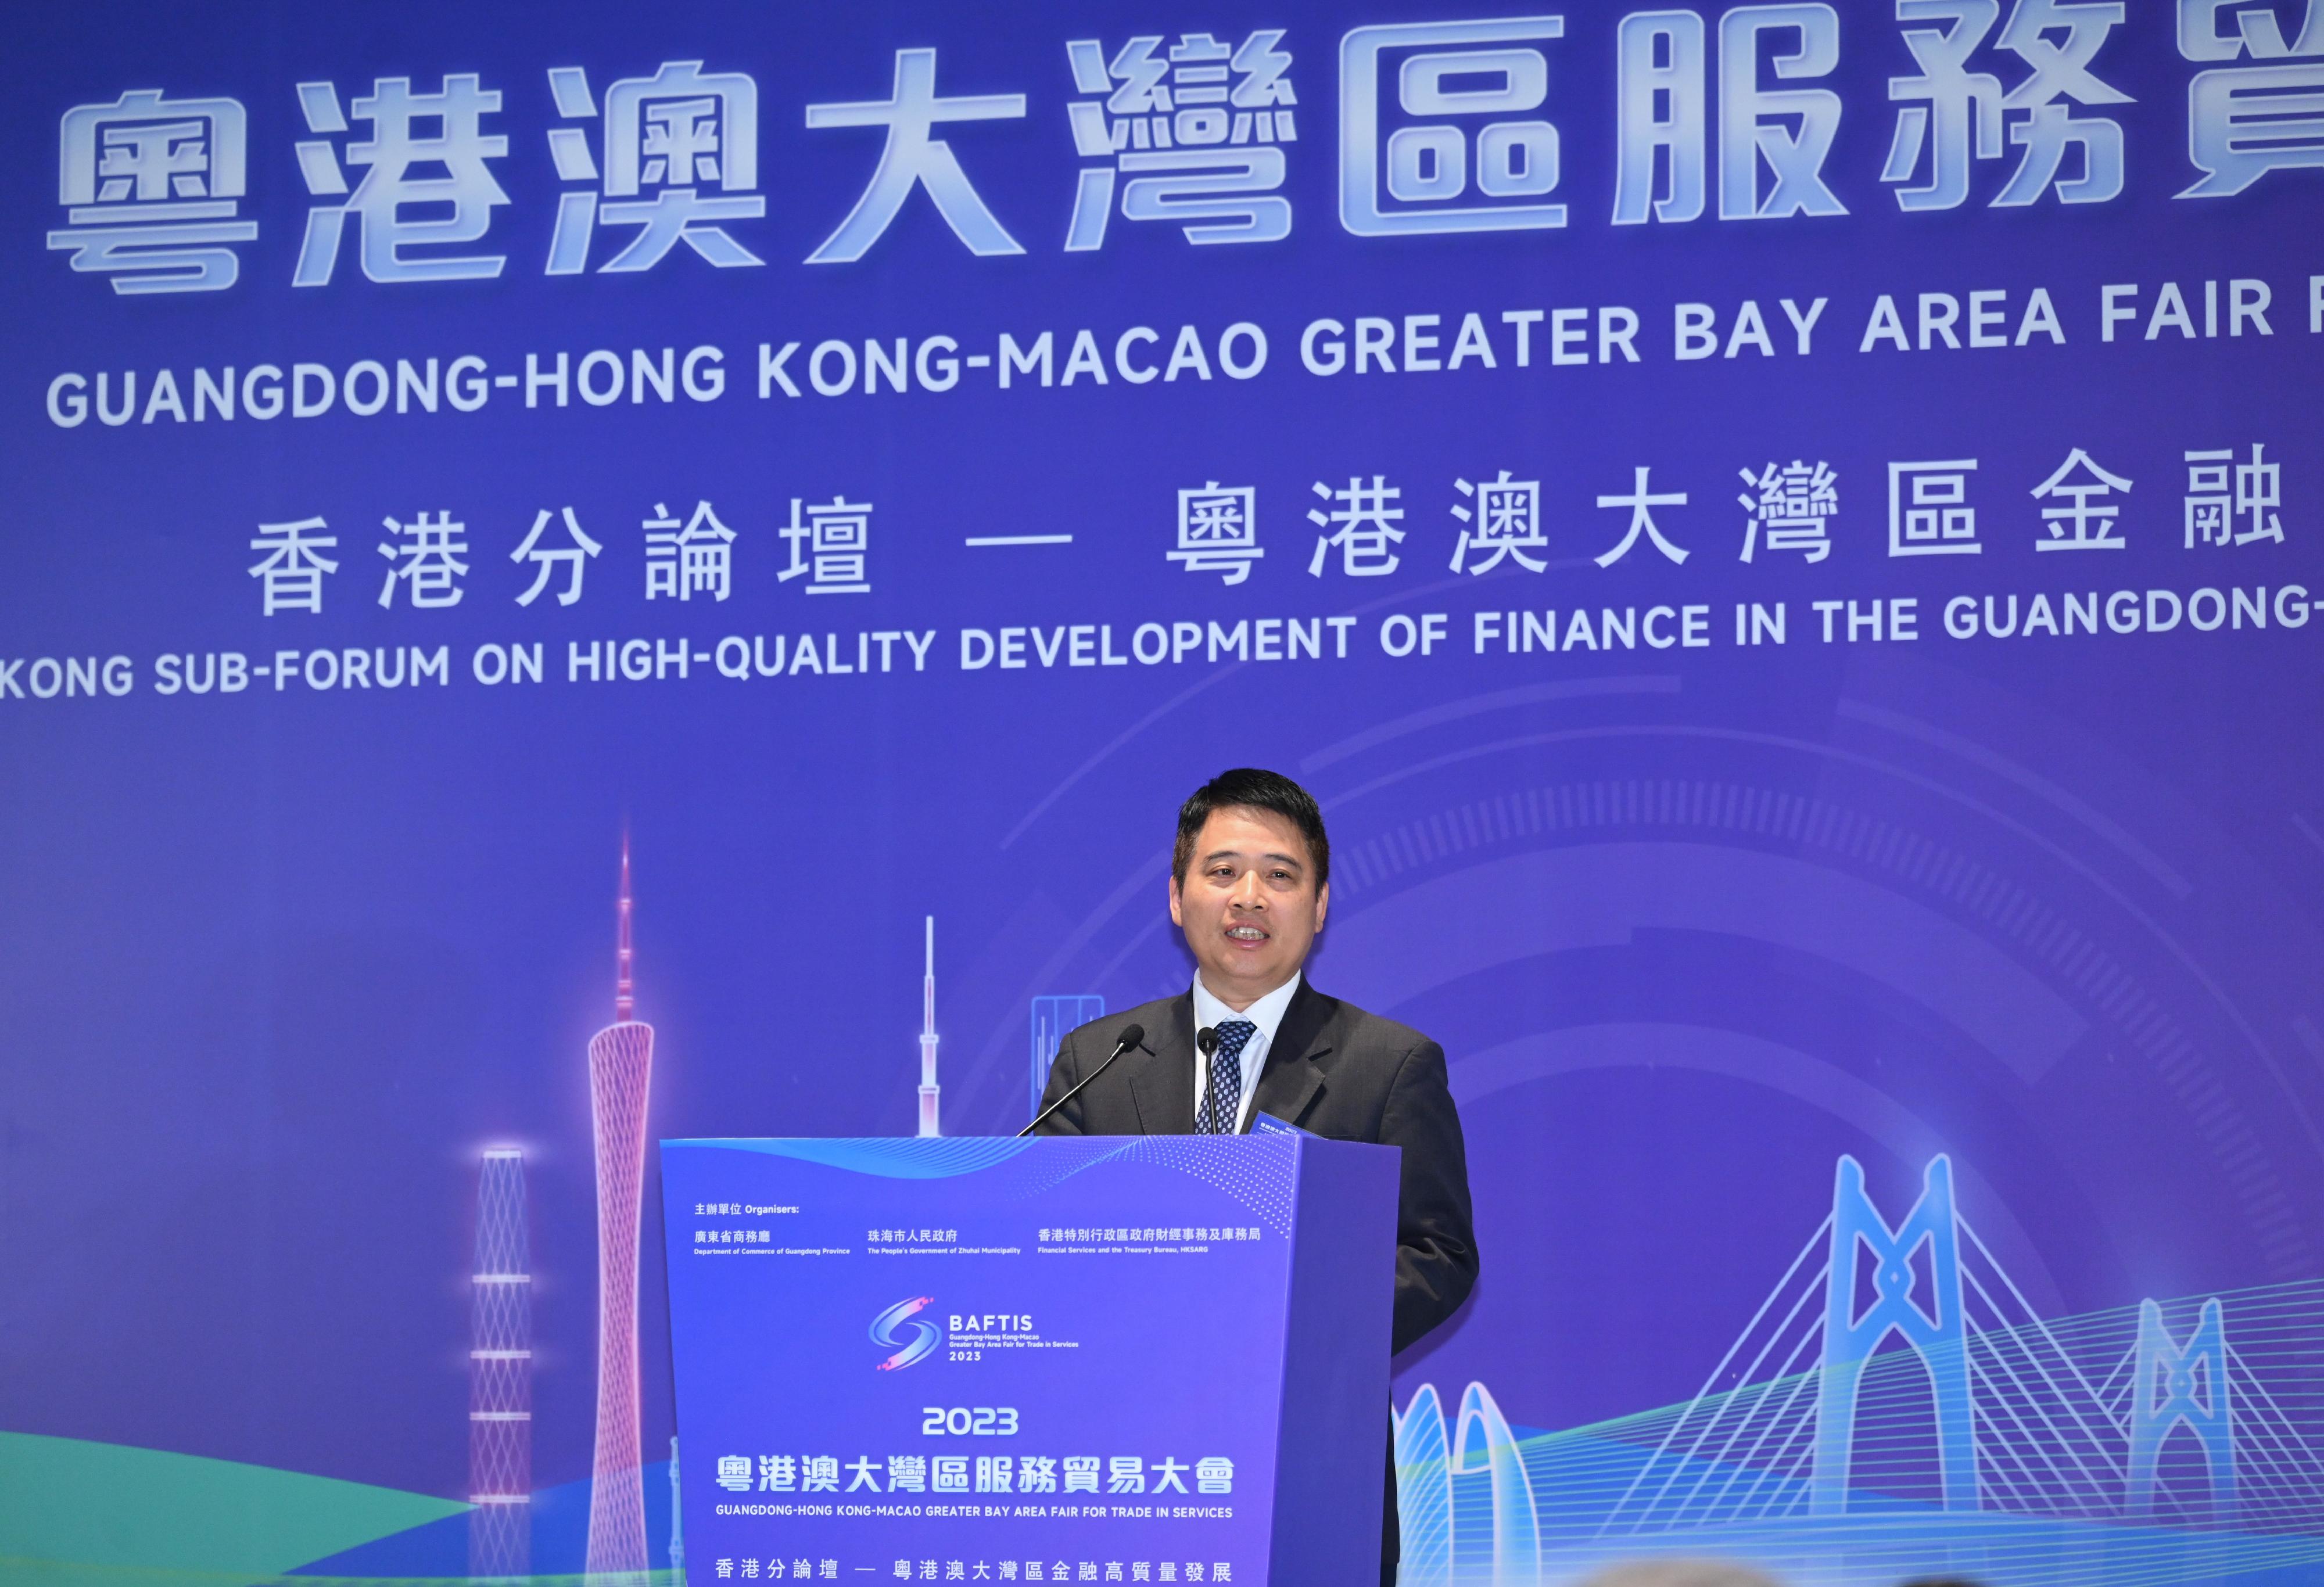 The Financial Services and the Treasury Bureau, the Department of Commerce of Guangdong Province and the People's Government of Zhuhai Municipality today (December 7) jointly held the Hong Kong Sub-forum of the 2023 Guangdong-Hong Kong-Macao Greater Bay Area Fair for Trade in Services. Photo shows the Mayor of the Zhuhai Municipal Government, Mr Huang Zhihao, speaking at the Sub-forum.